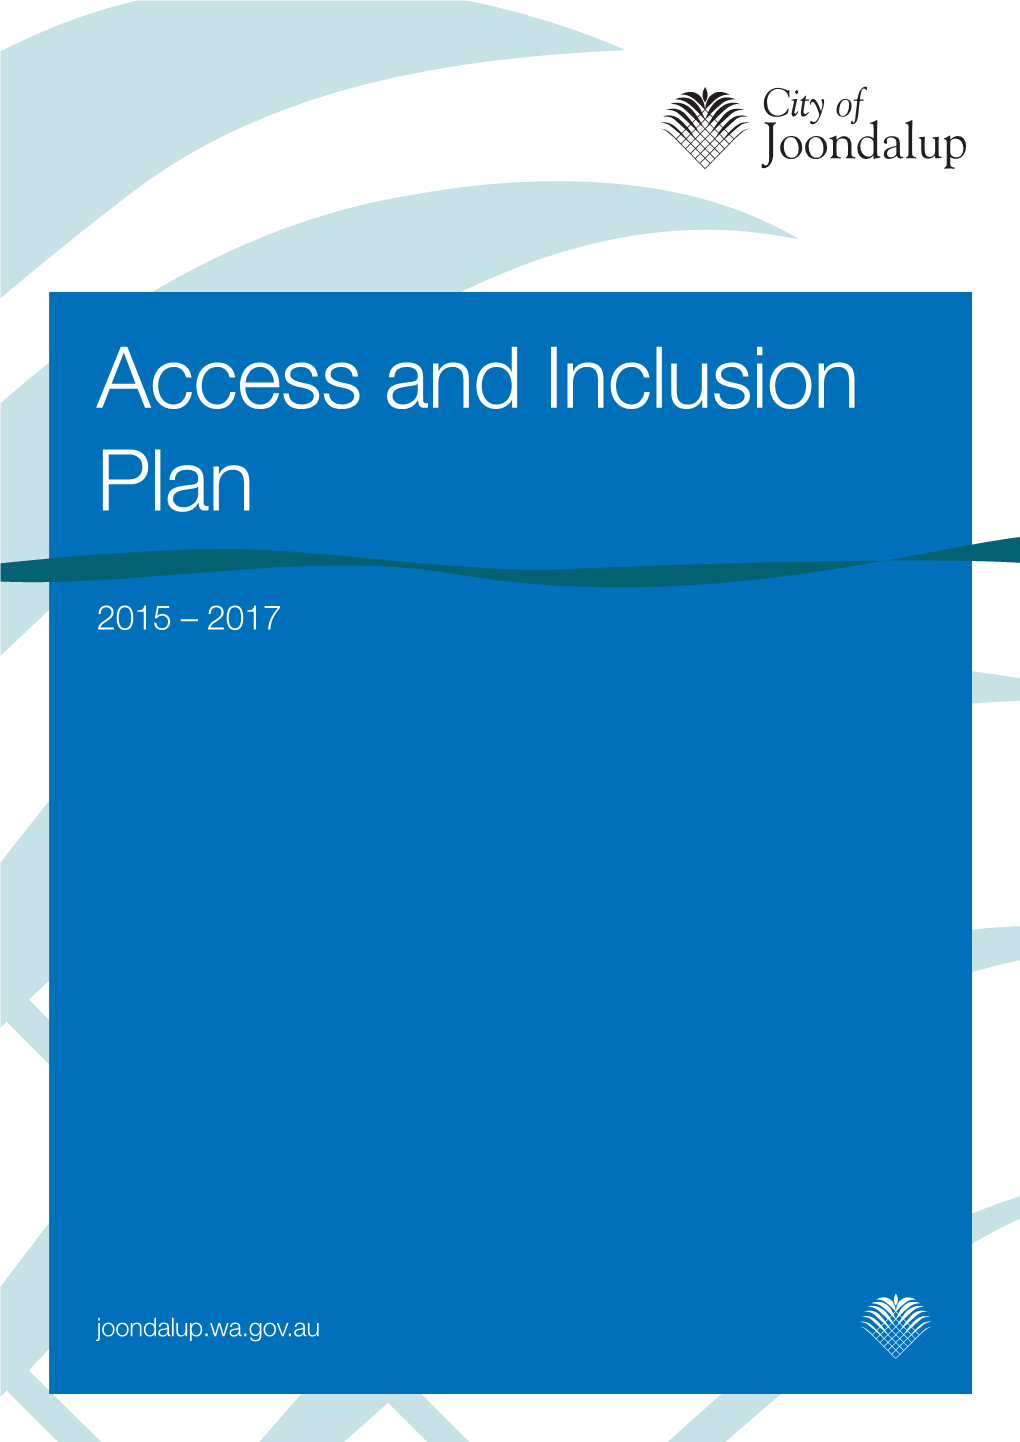 City of Joondalup | Access and Inclusion Plan 2015-2017